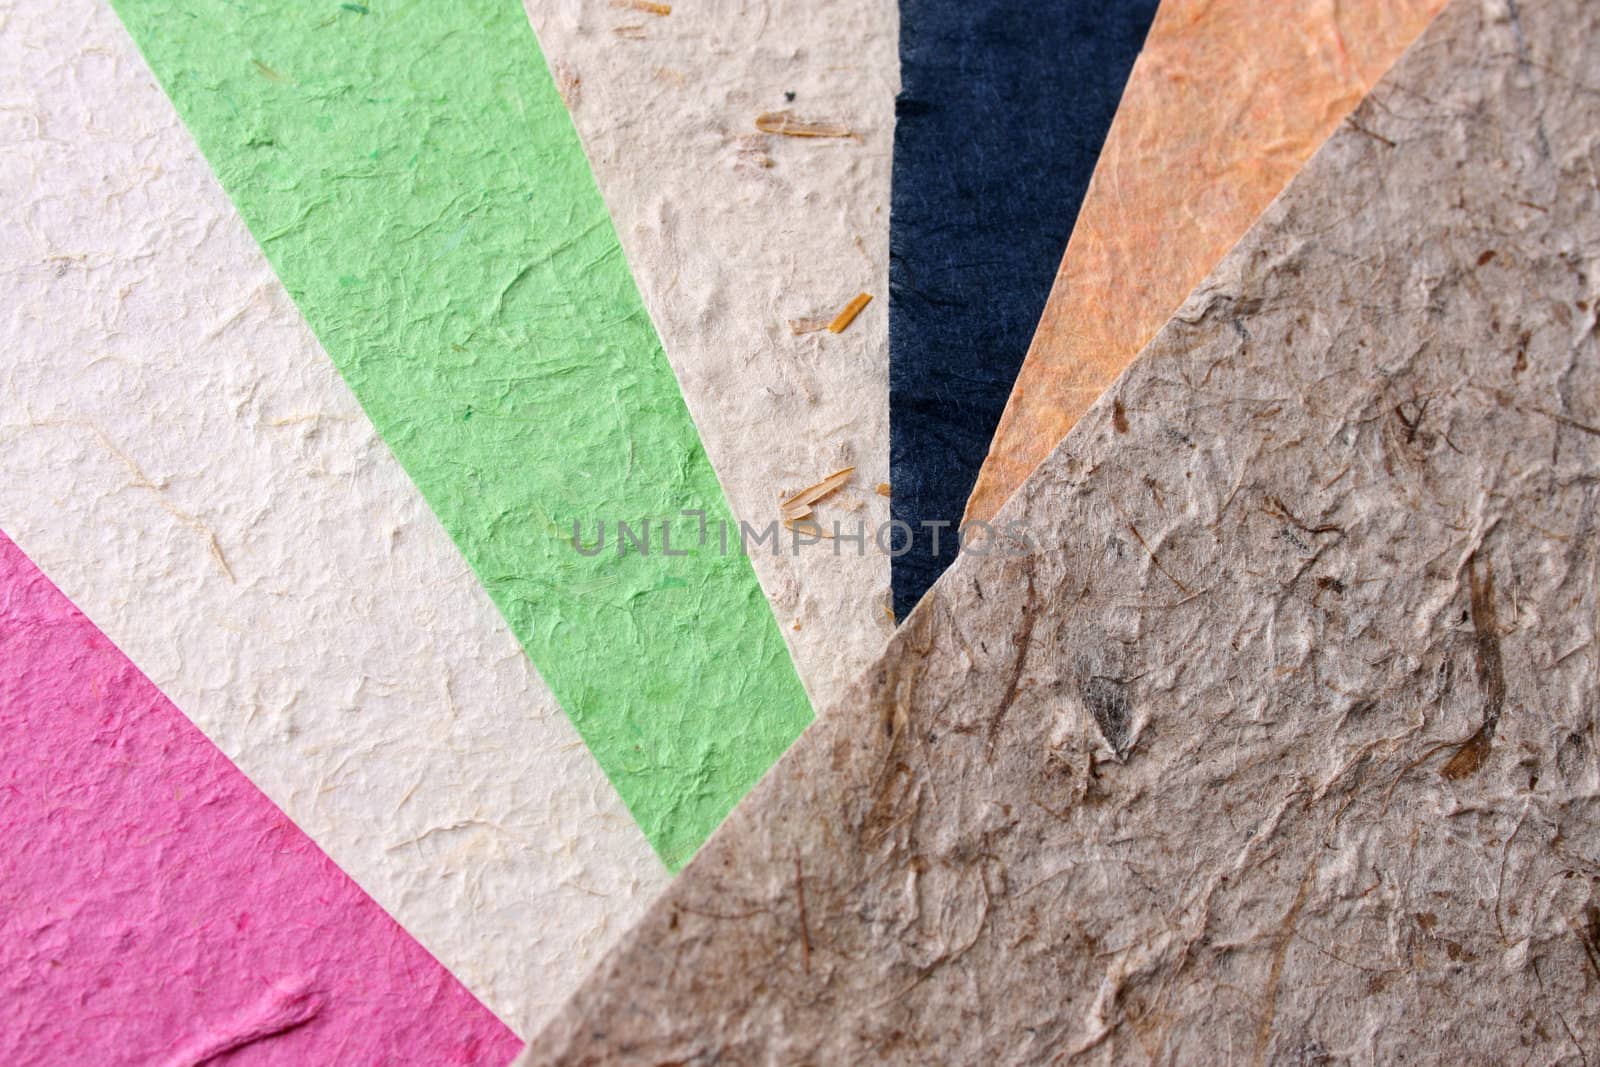 Different colored Handmade paper with various textures